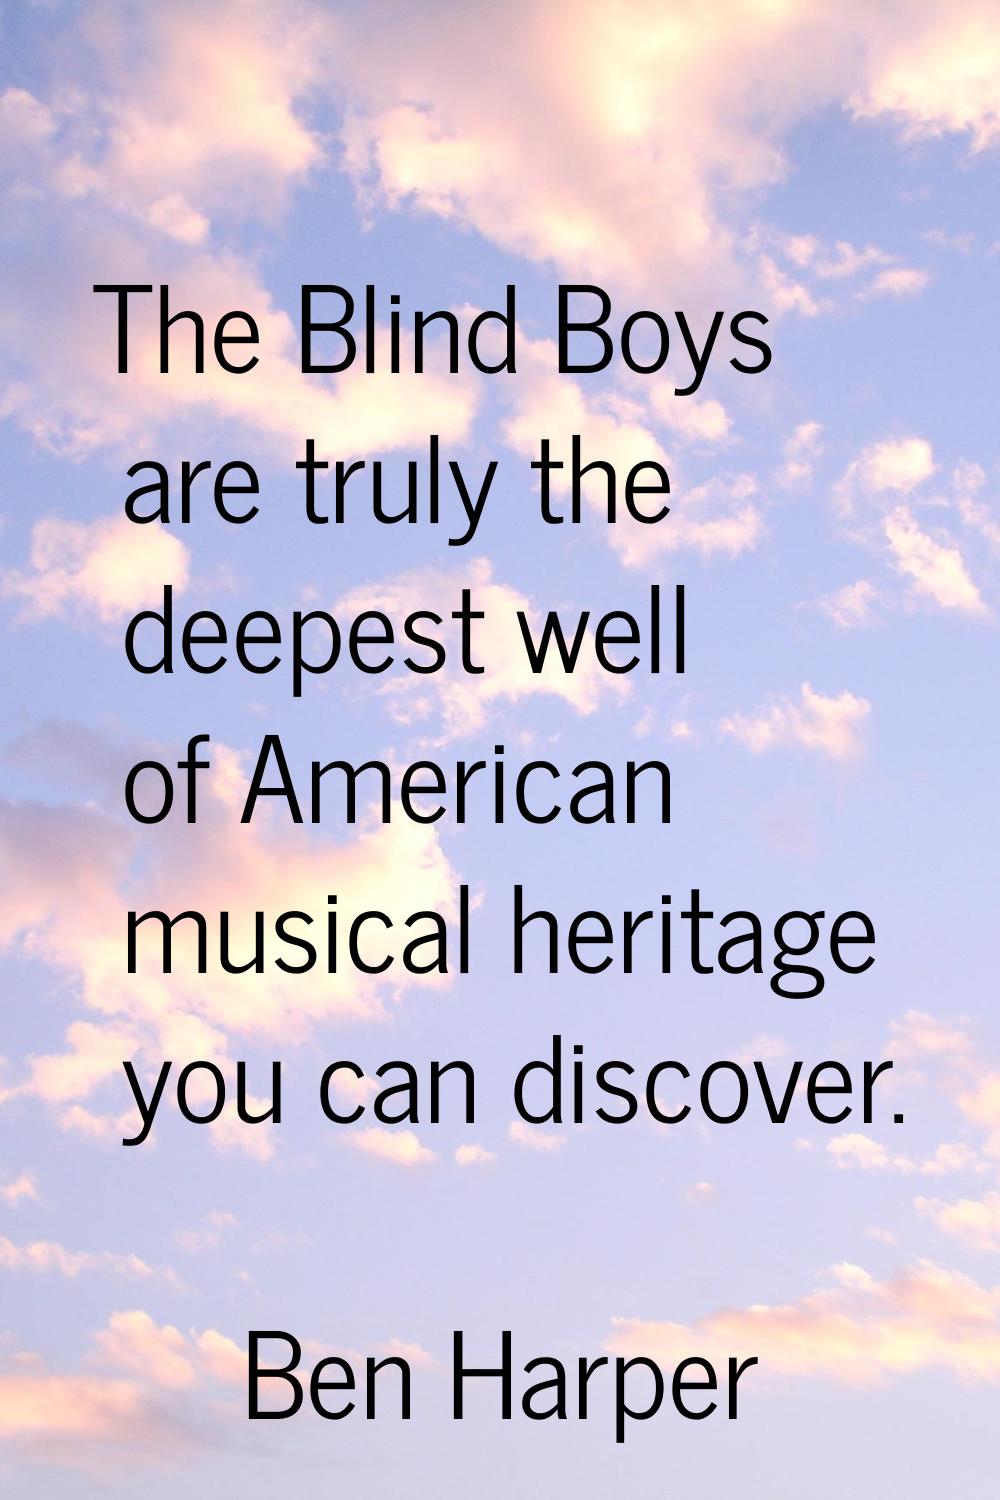 The Blind Boys are truly the deepest well of American musical heritage you can discover.